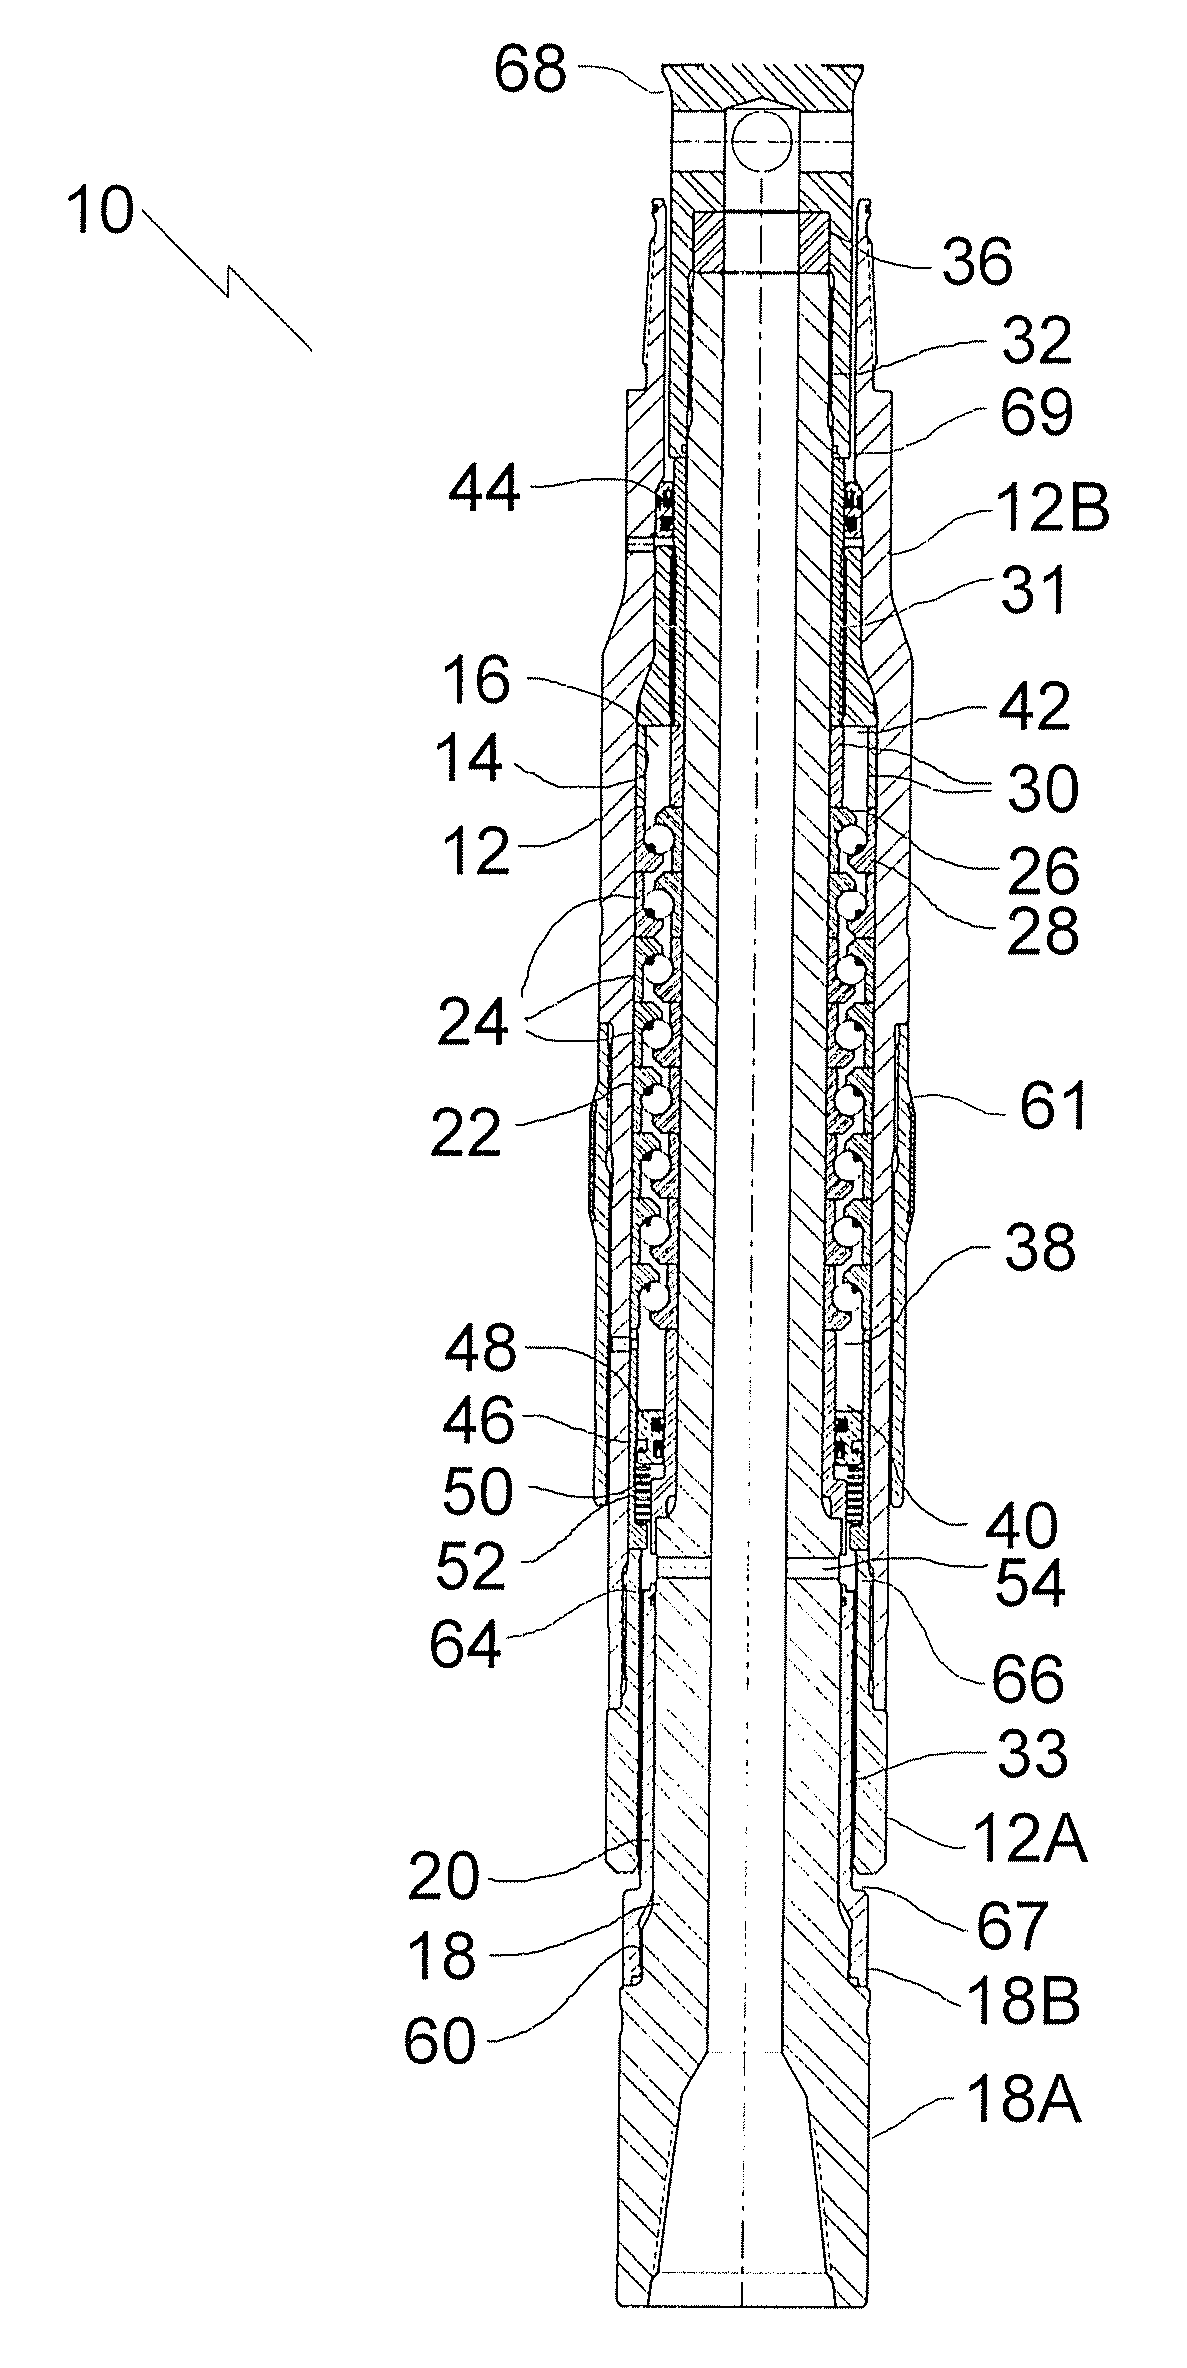 Method of providing a consistent preload on thrust bearings in a bearing assembly